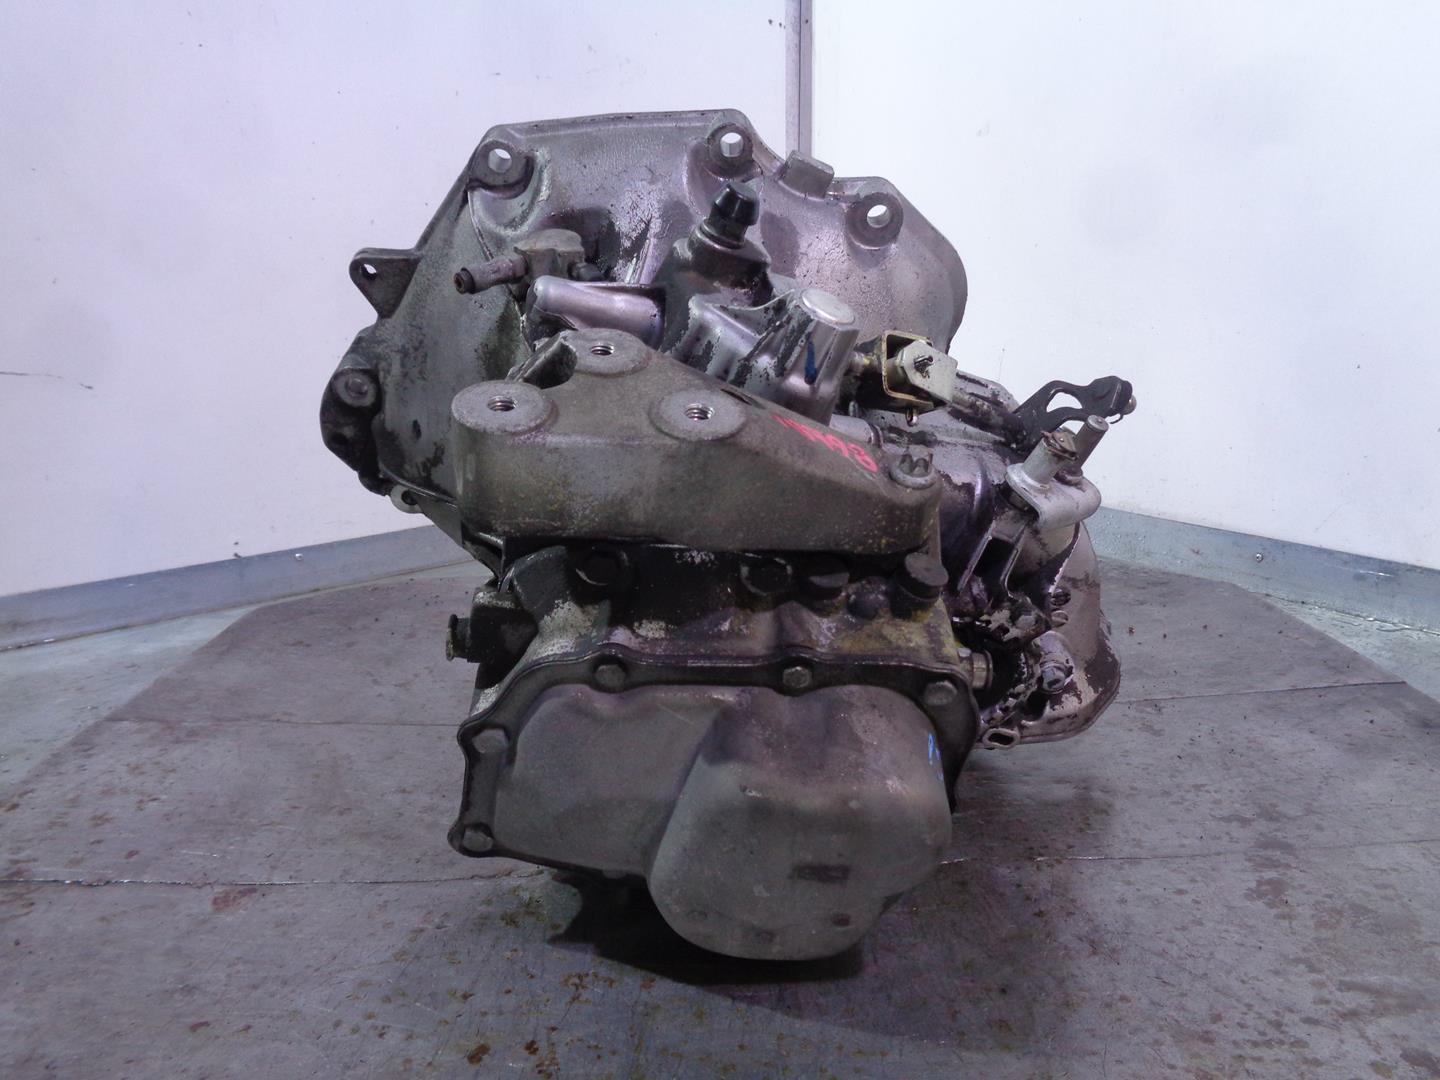 OPEL Astra H (2004-2014) Gearbox F17C374, A12491F17C374, 700041 24155179